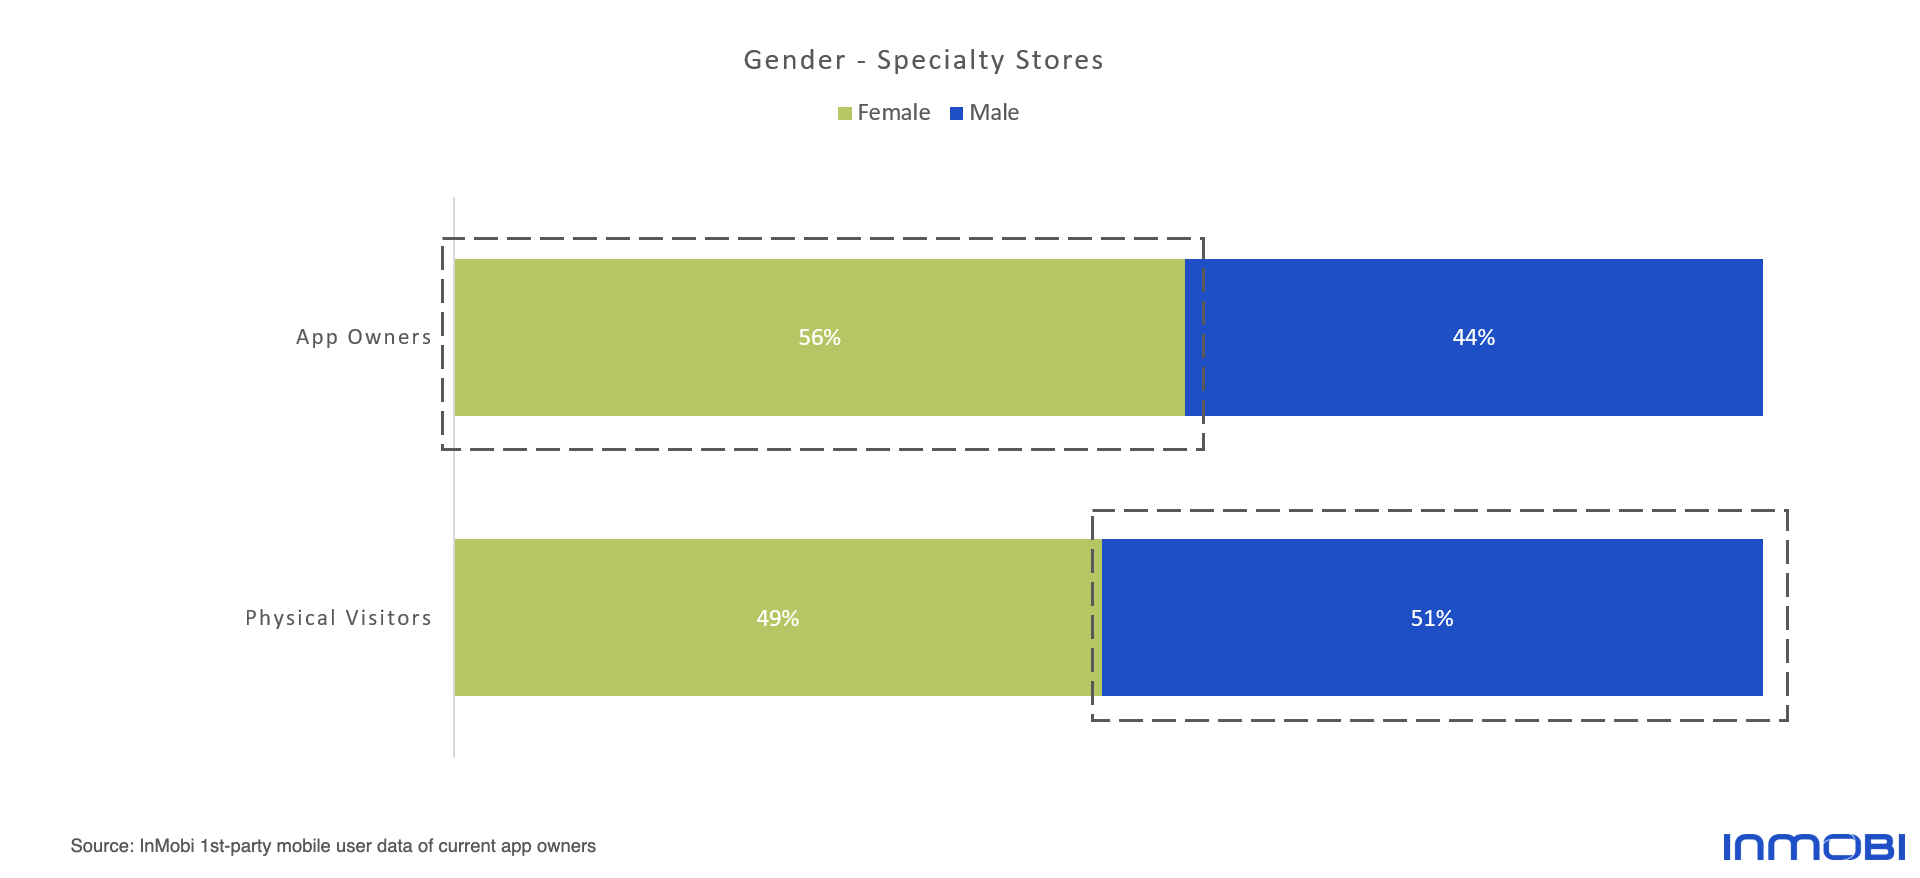 InMobi Speciality Retail Customer Insights: App Ownership by Gender